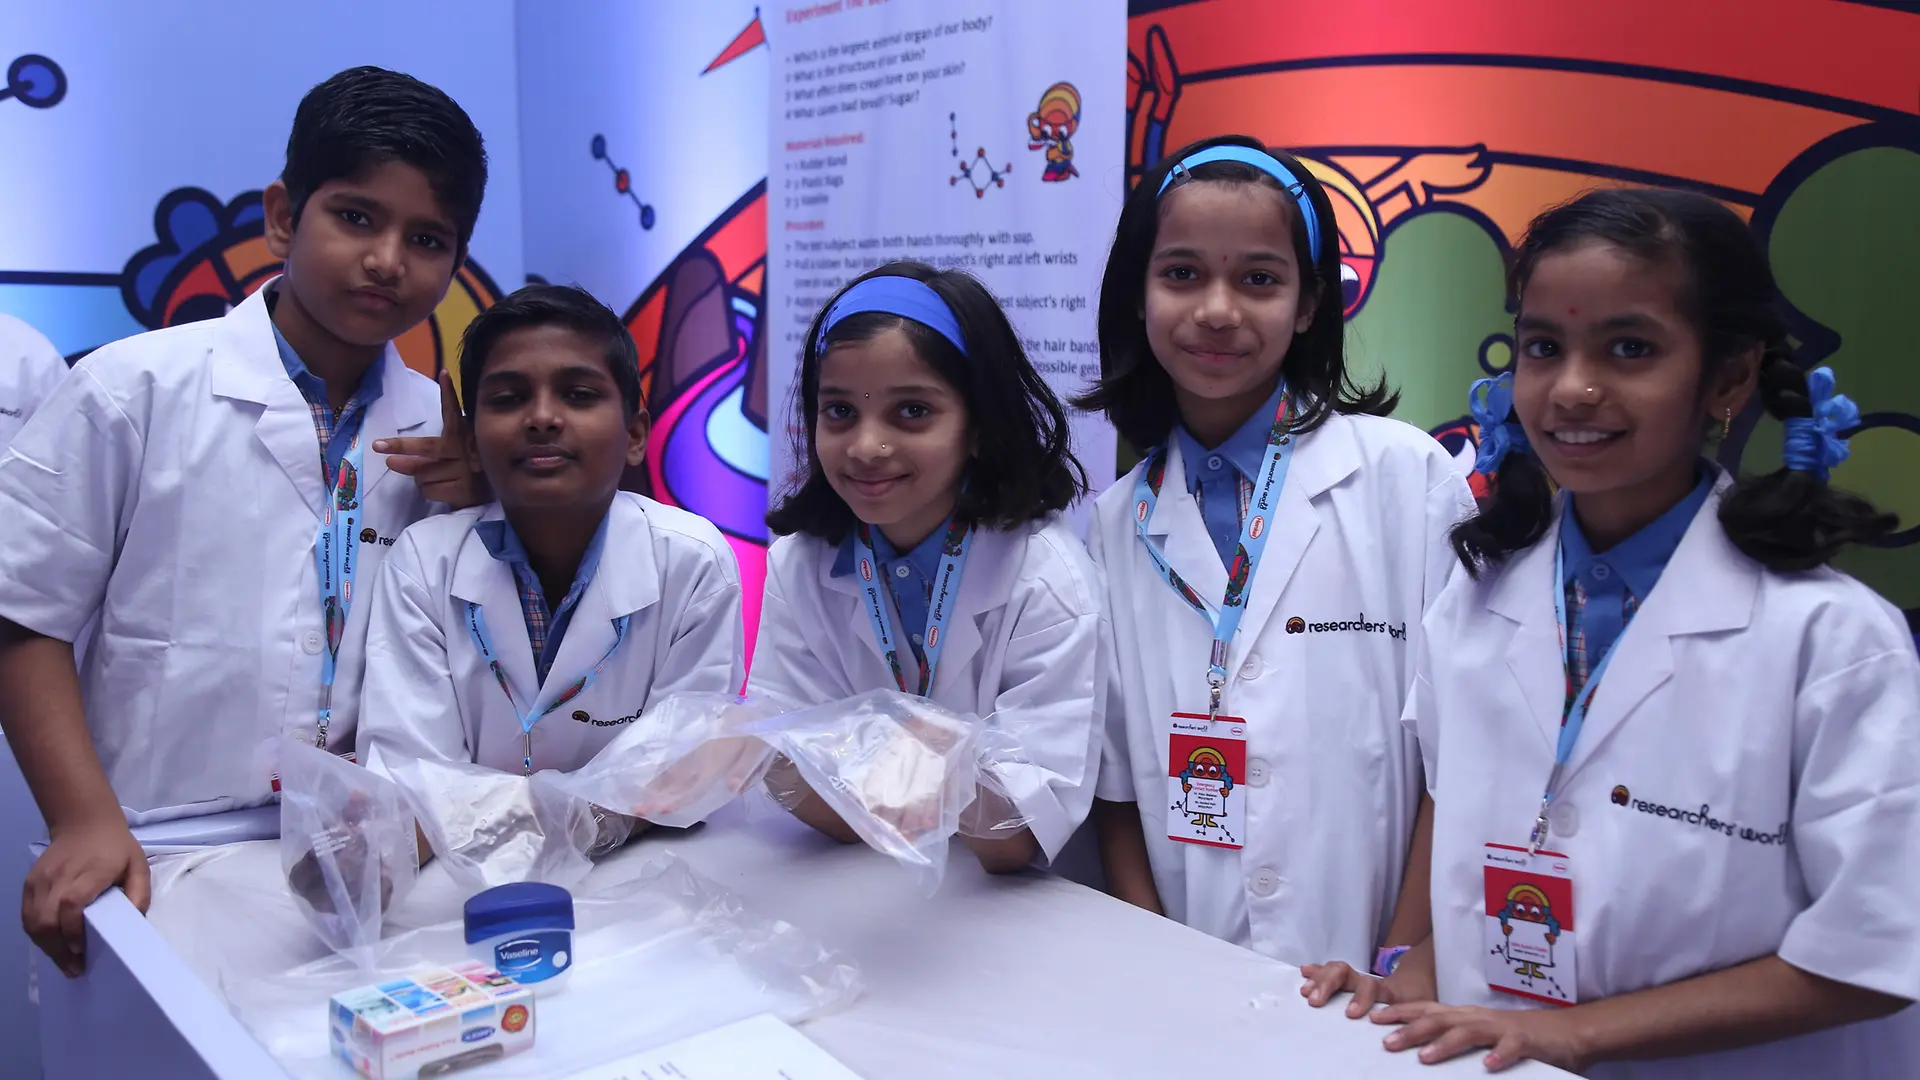 group of Indian children in lab coats standing at a white table